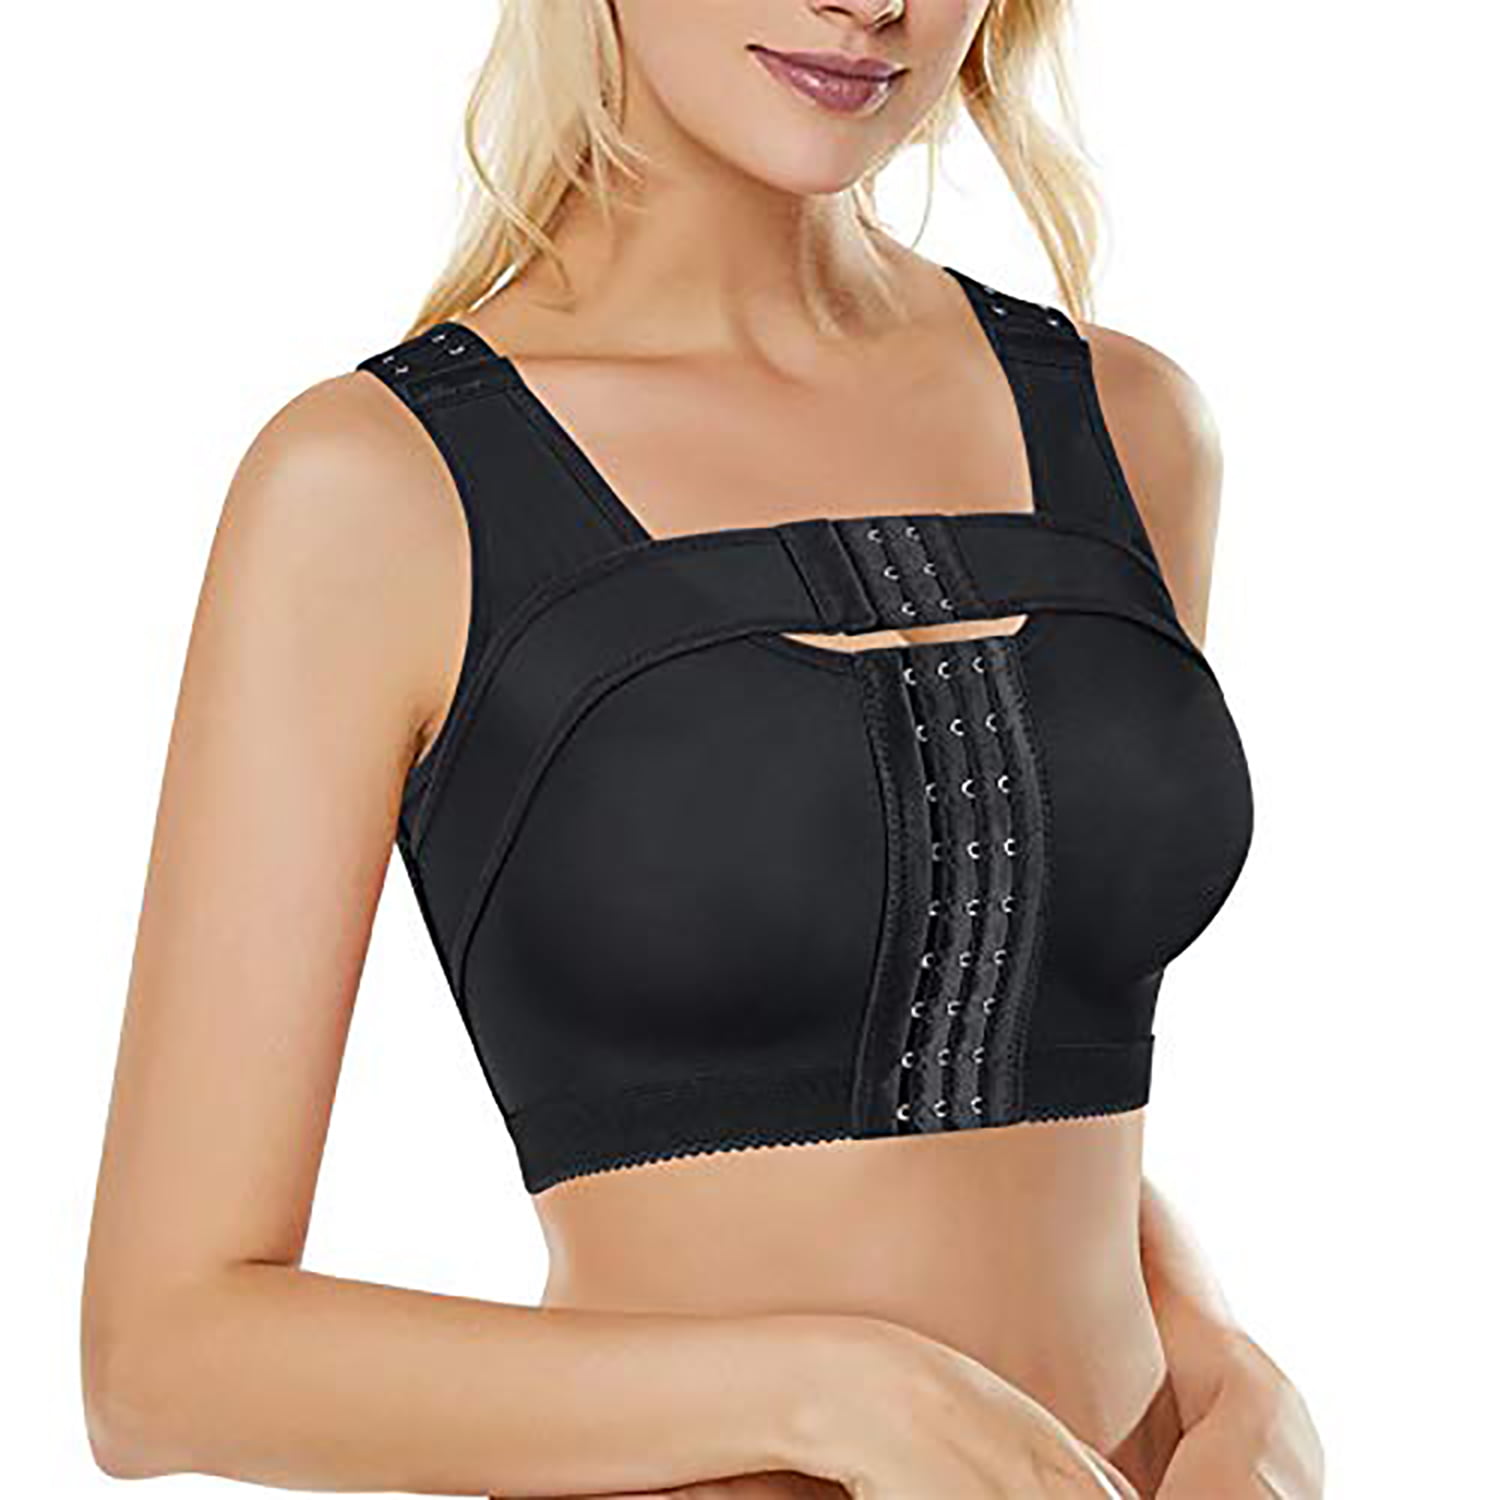 Jieowen Women's Front Closure Bra Post-Surgery Posture Corrector Shaper  Tops with Breast Support Band,Black(For 32-42) 